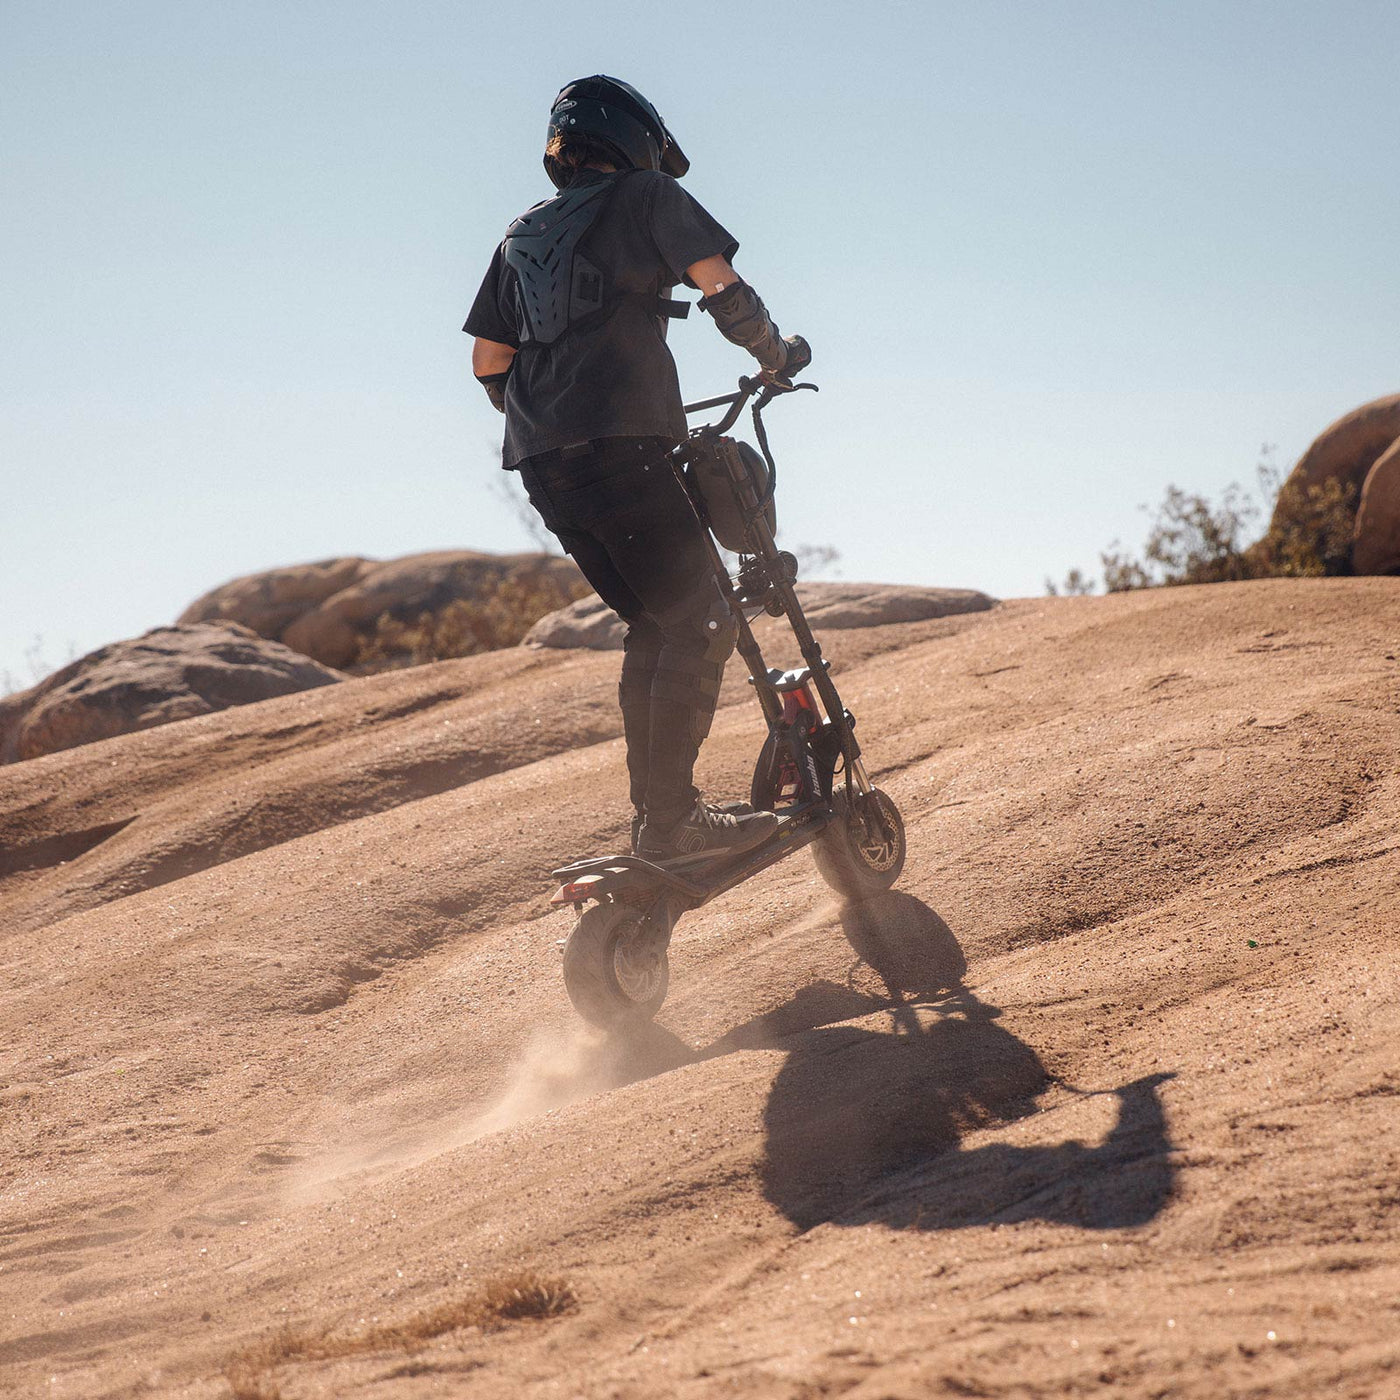 Rider conquering a steep hill with the Kaabo Wolf Warrior 11 Pro+ electric scooter, showcasing its impressive hill-climbing ability and durable design in a rugged outdoor setting.